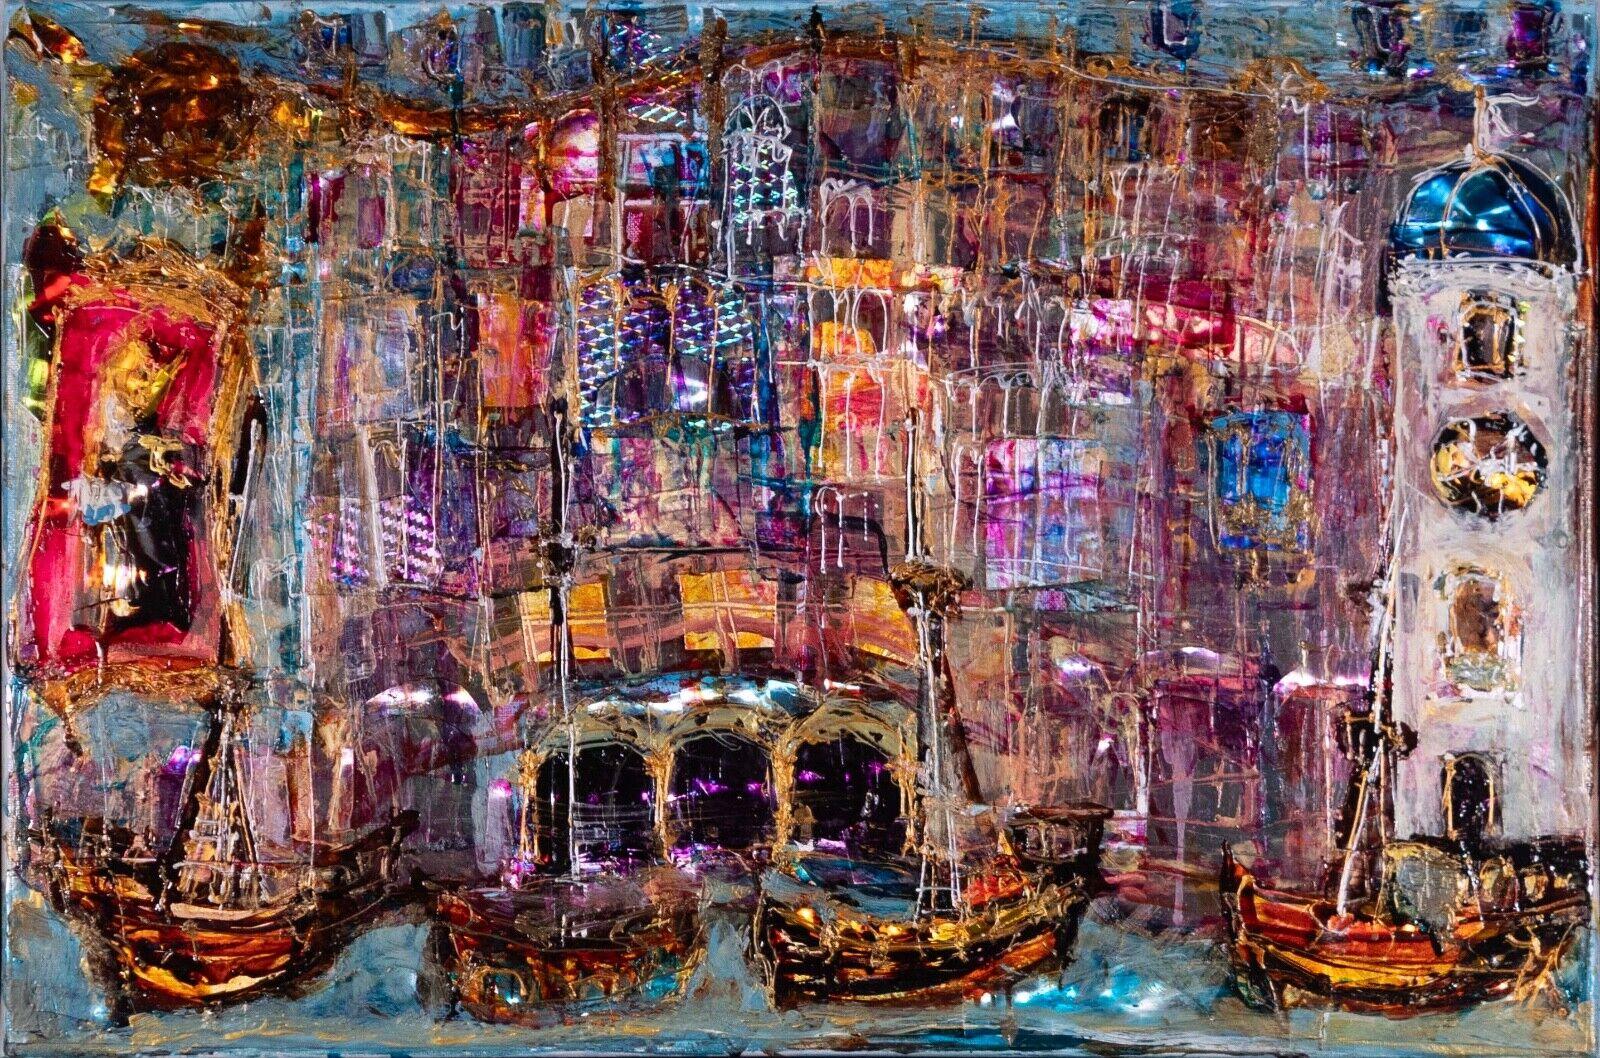 A dramatic yet stunning mixed-media painting on canvas by contemporary Croatian artist Jadranka Munitic. Signed identification card on verso. The painting is a vibrant harbor scene with hypnotic metallic details and lively colors. The artist often